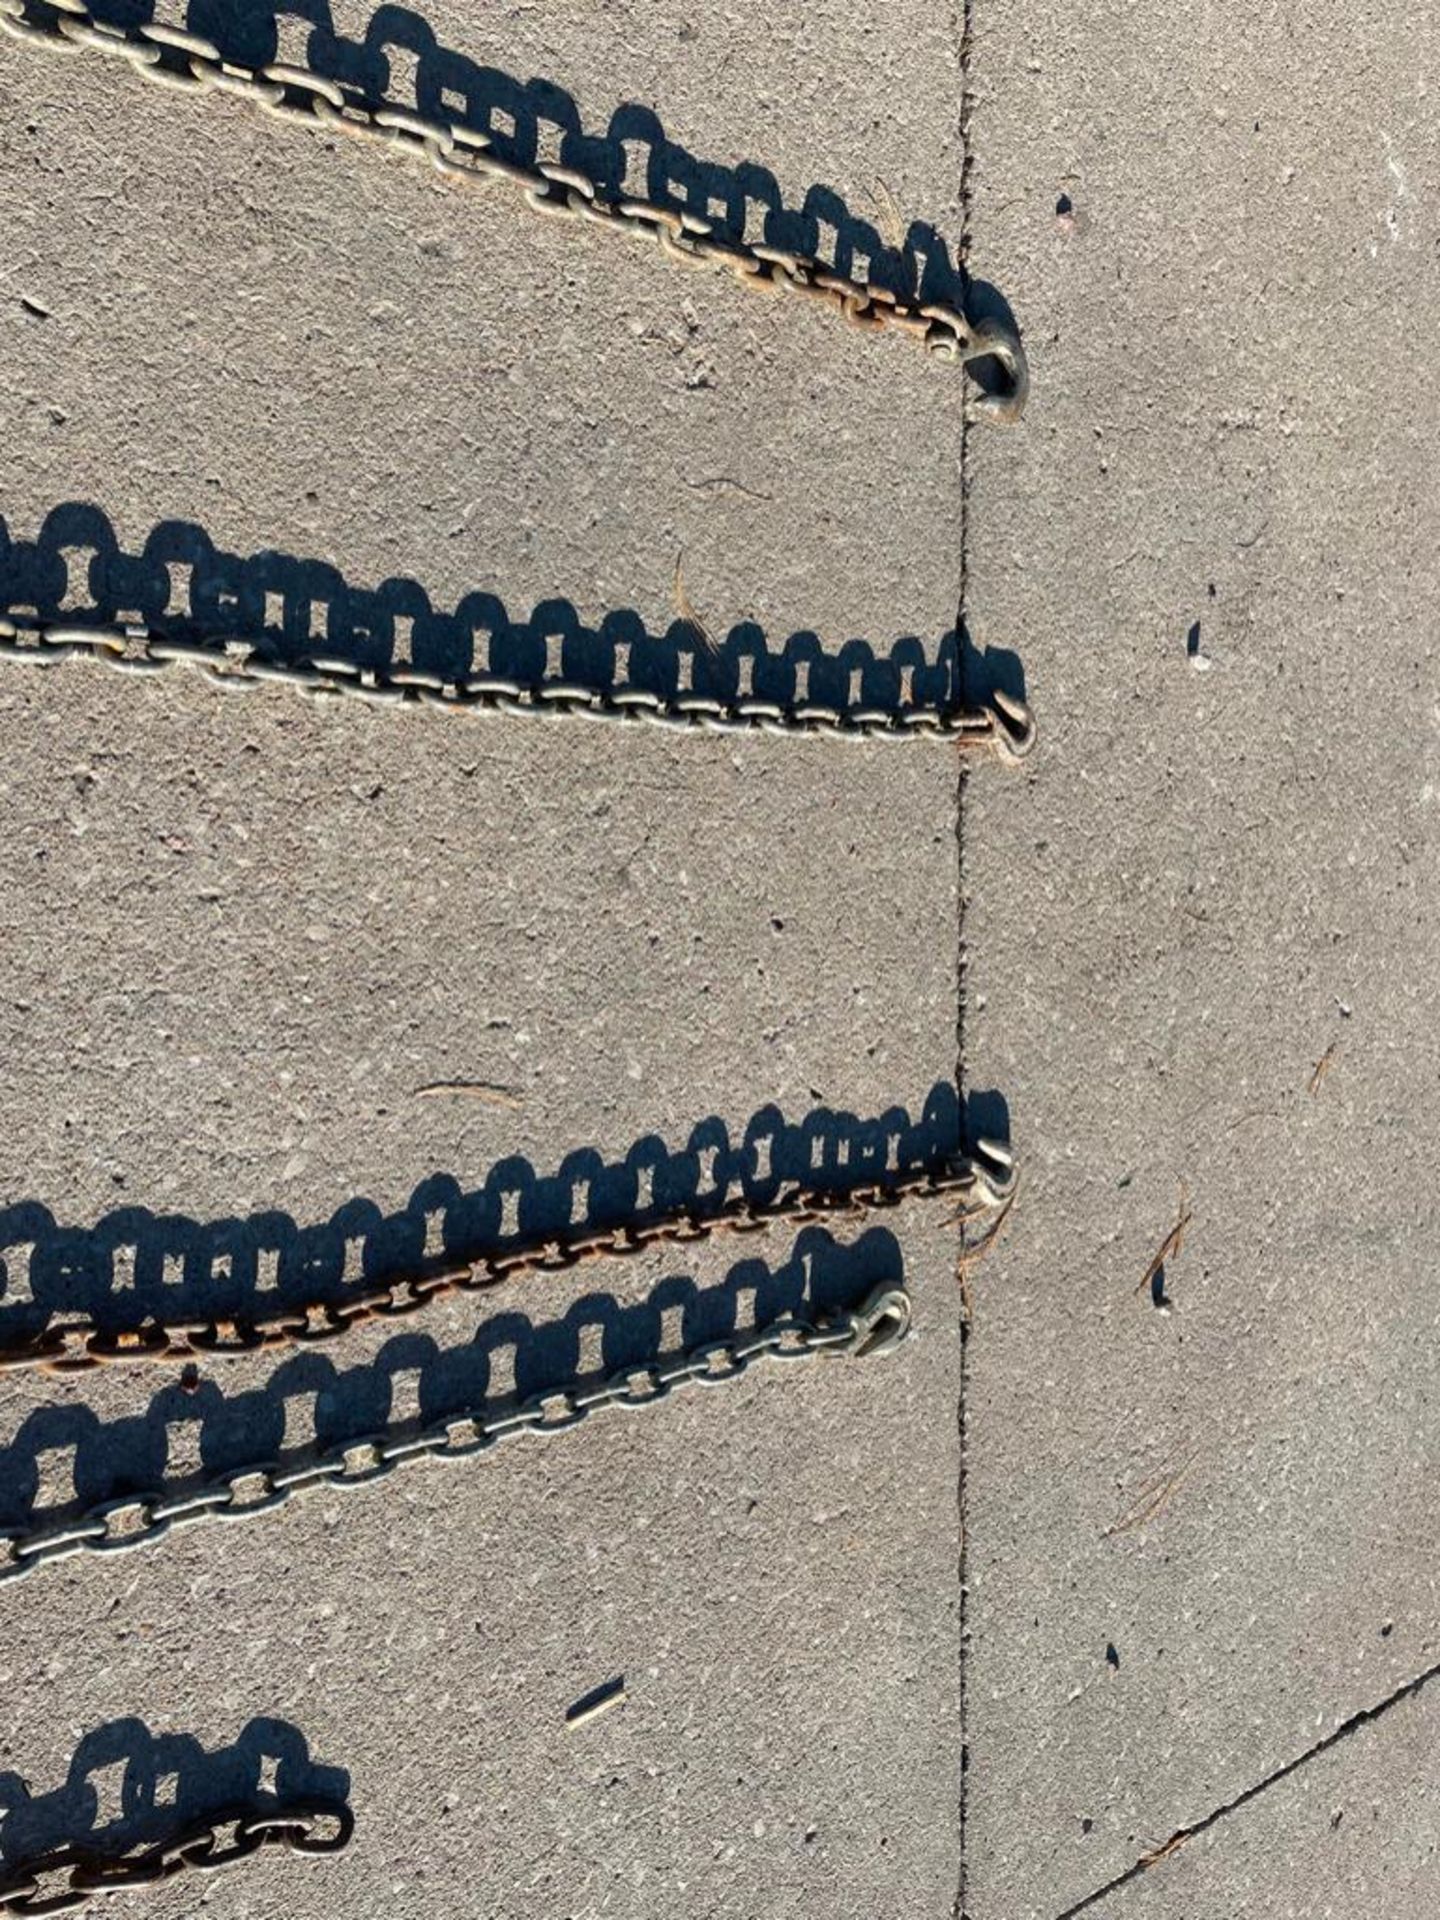 (5) Log Chains. (4) 20' Log Chains with Clevis Hook & (1) 18' Log Chain. Located in Hazelwood, MO - Image 2 of 4